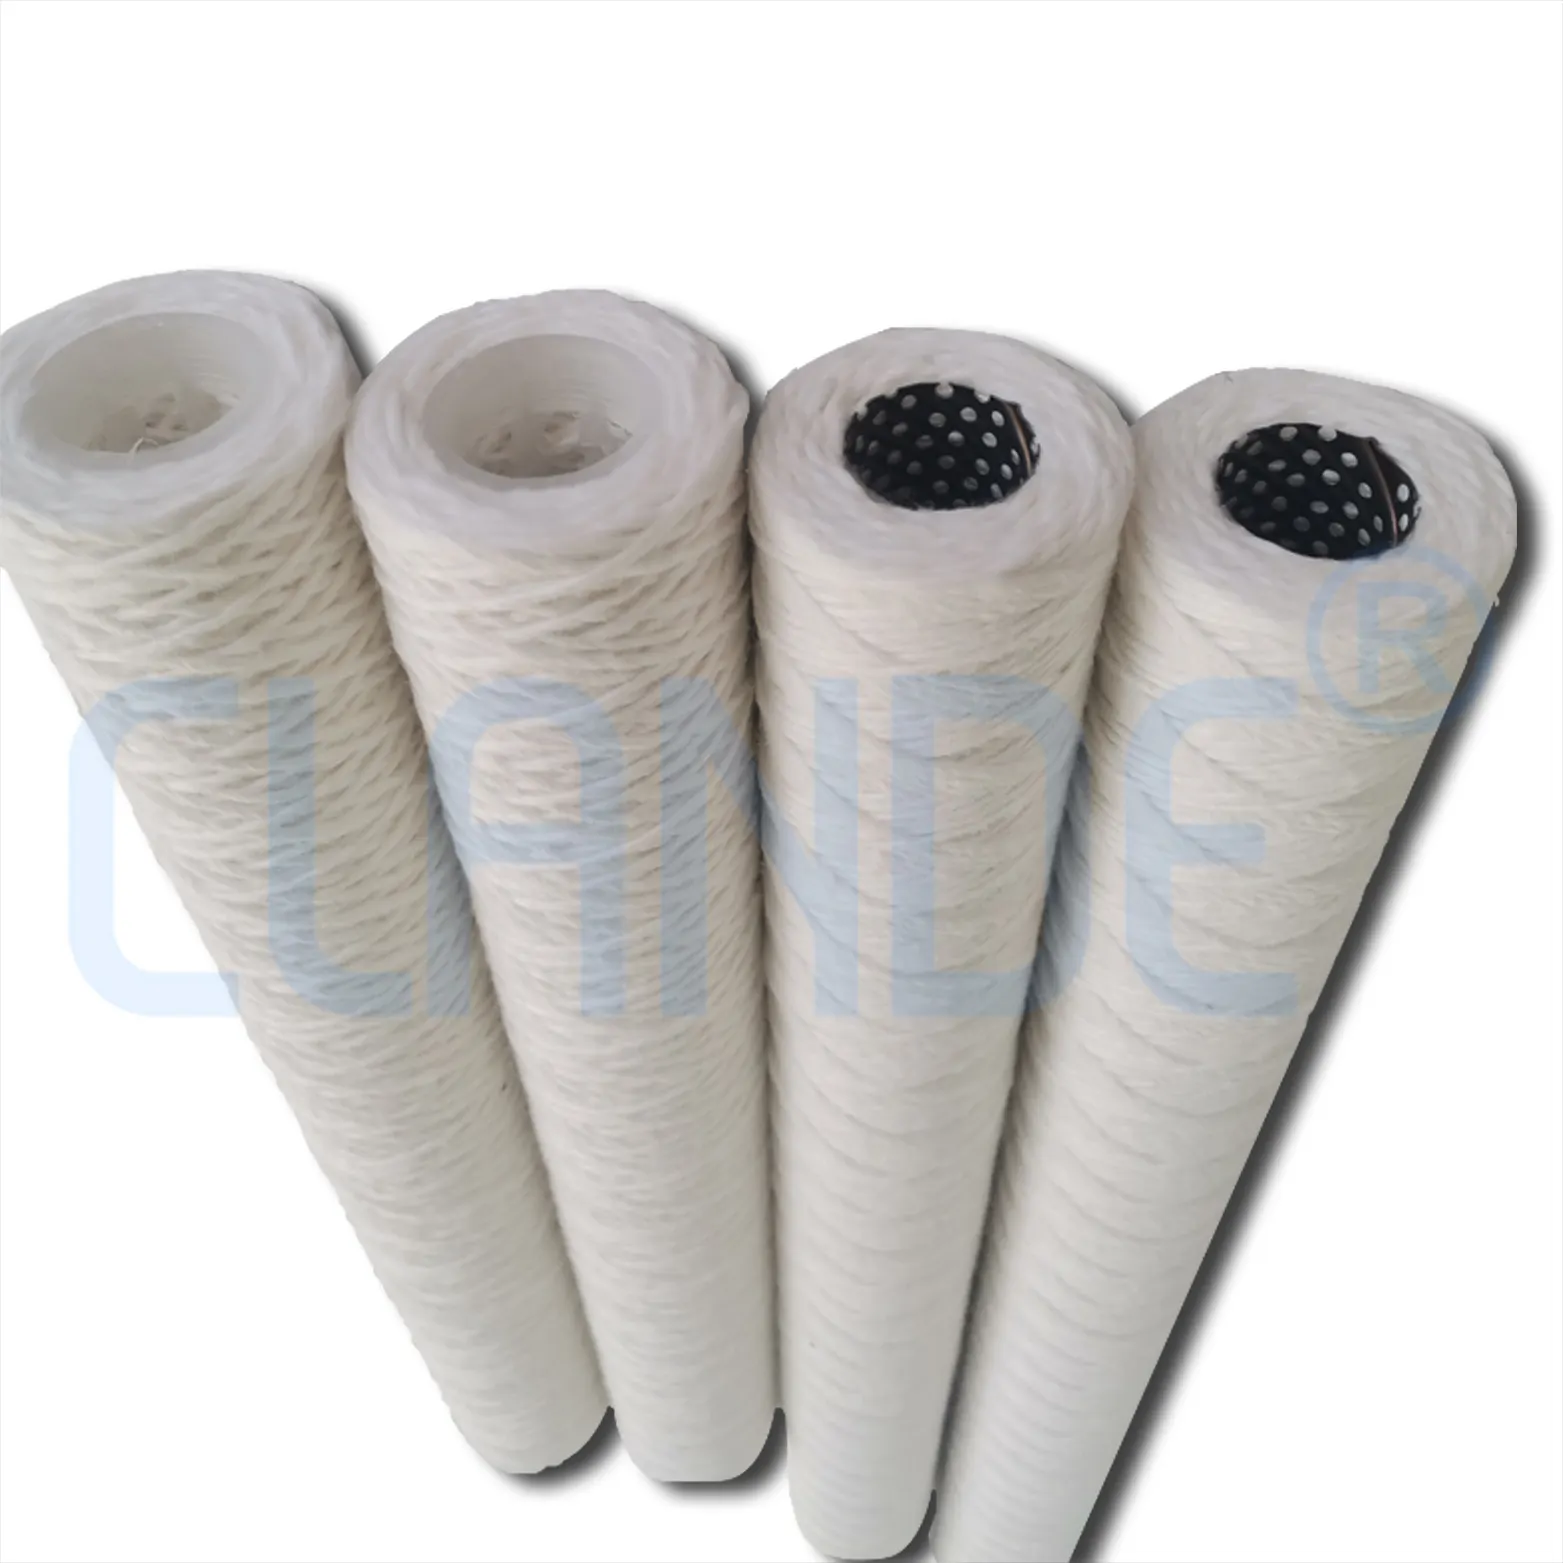 High Quality 20 Inch 5 Micron Pp String Wound Cartridges For Sediment Filter